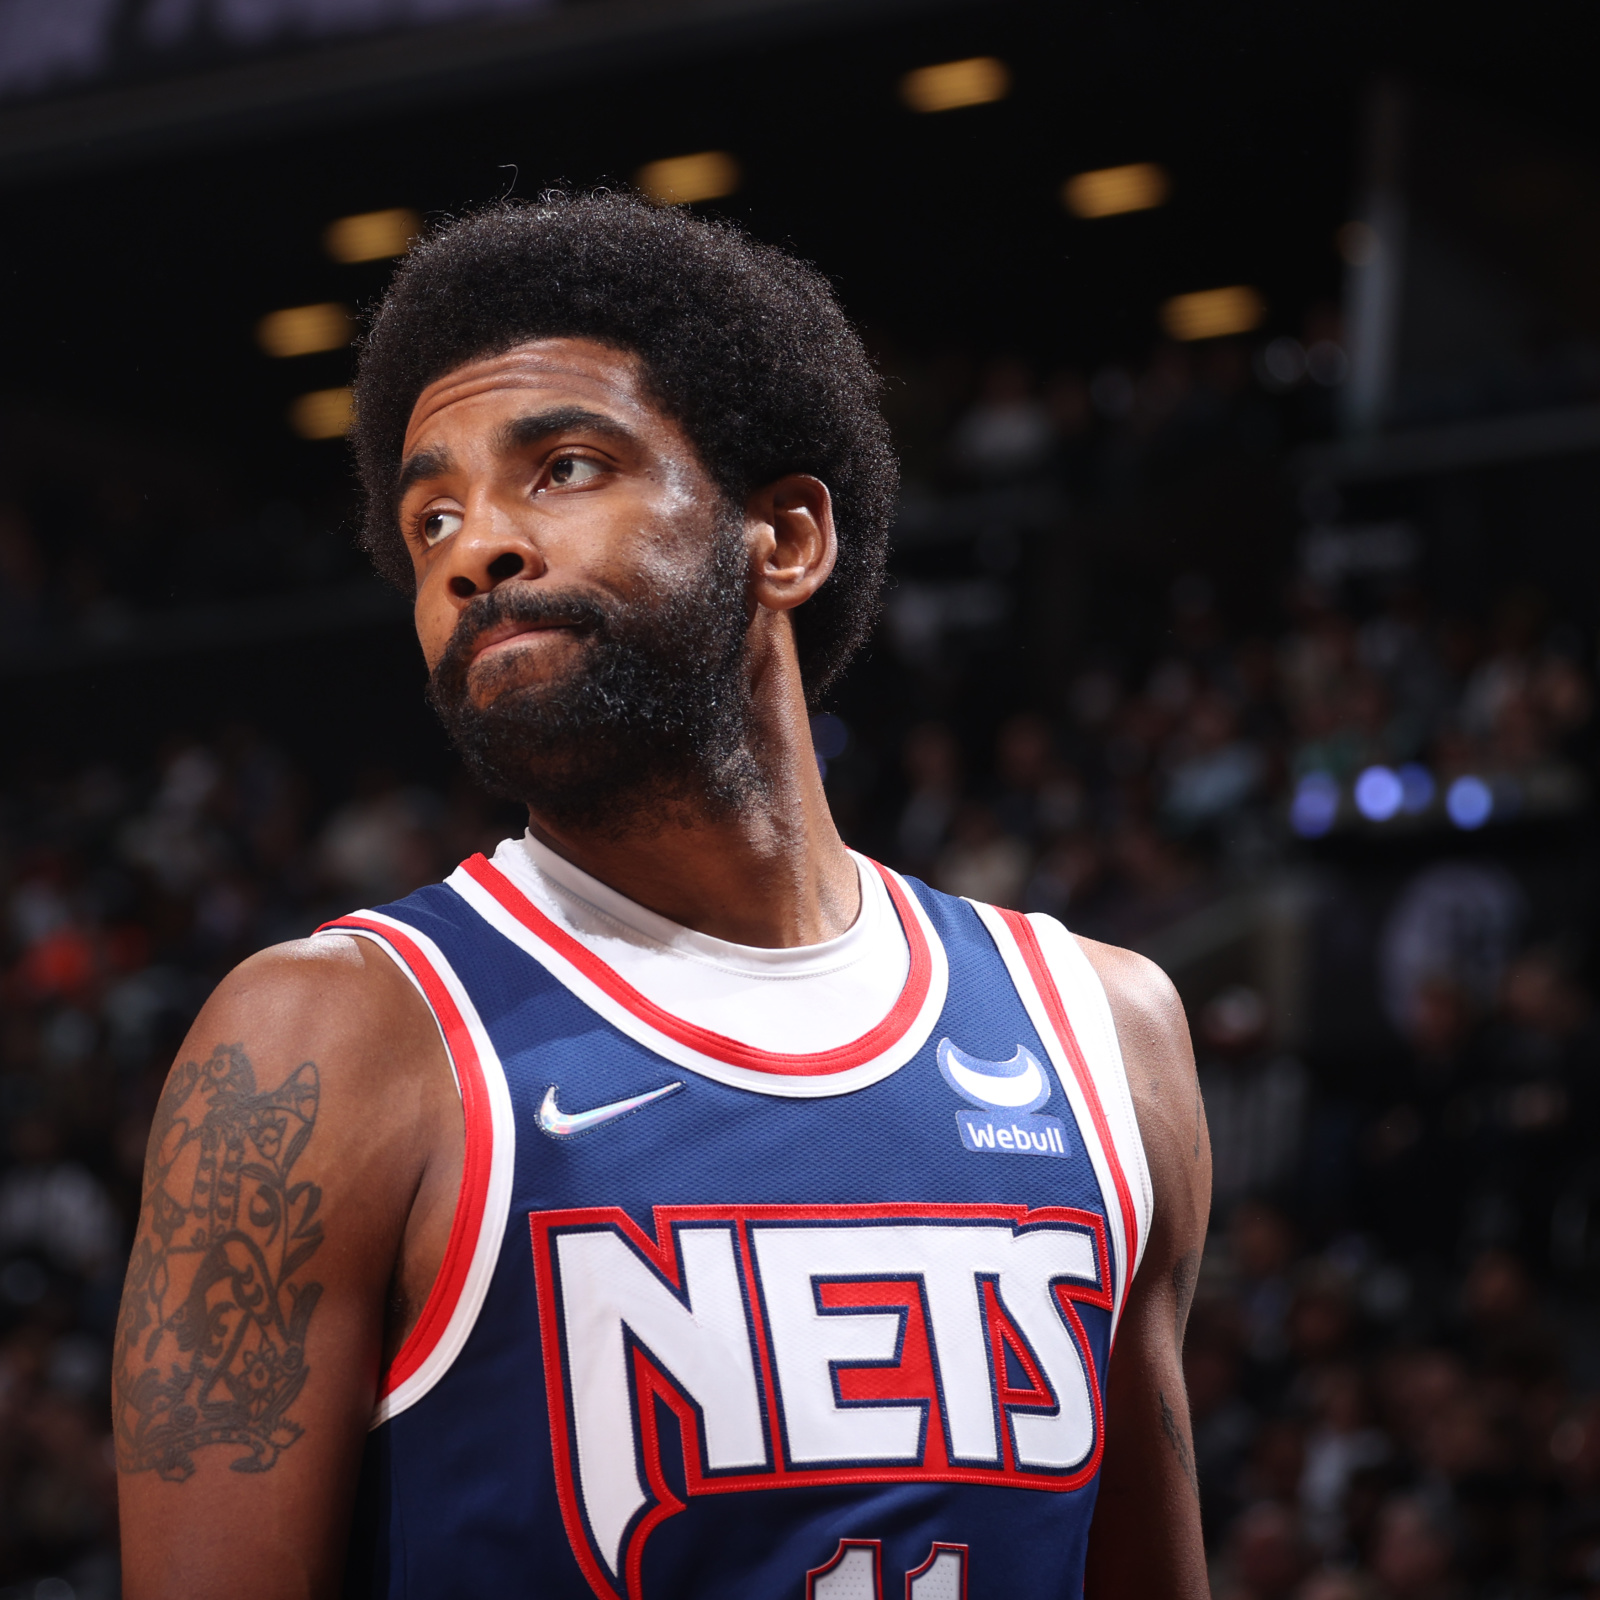 Miami Heat are contemplating a move for Brooklyn Nets' Kyrie Irving